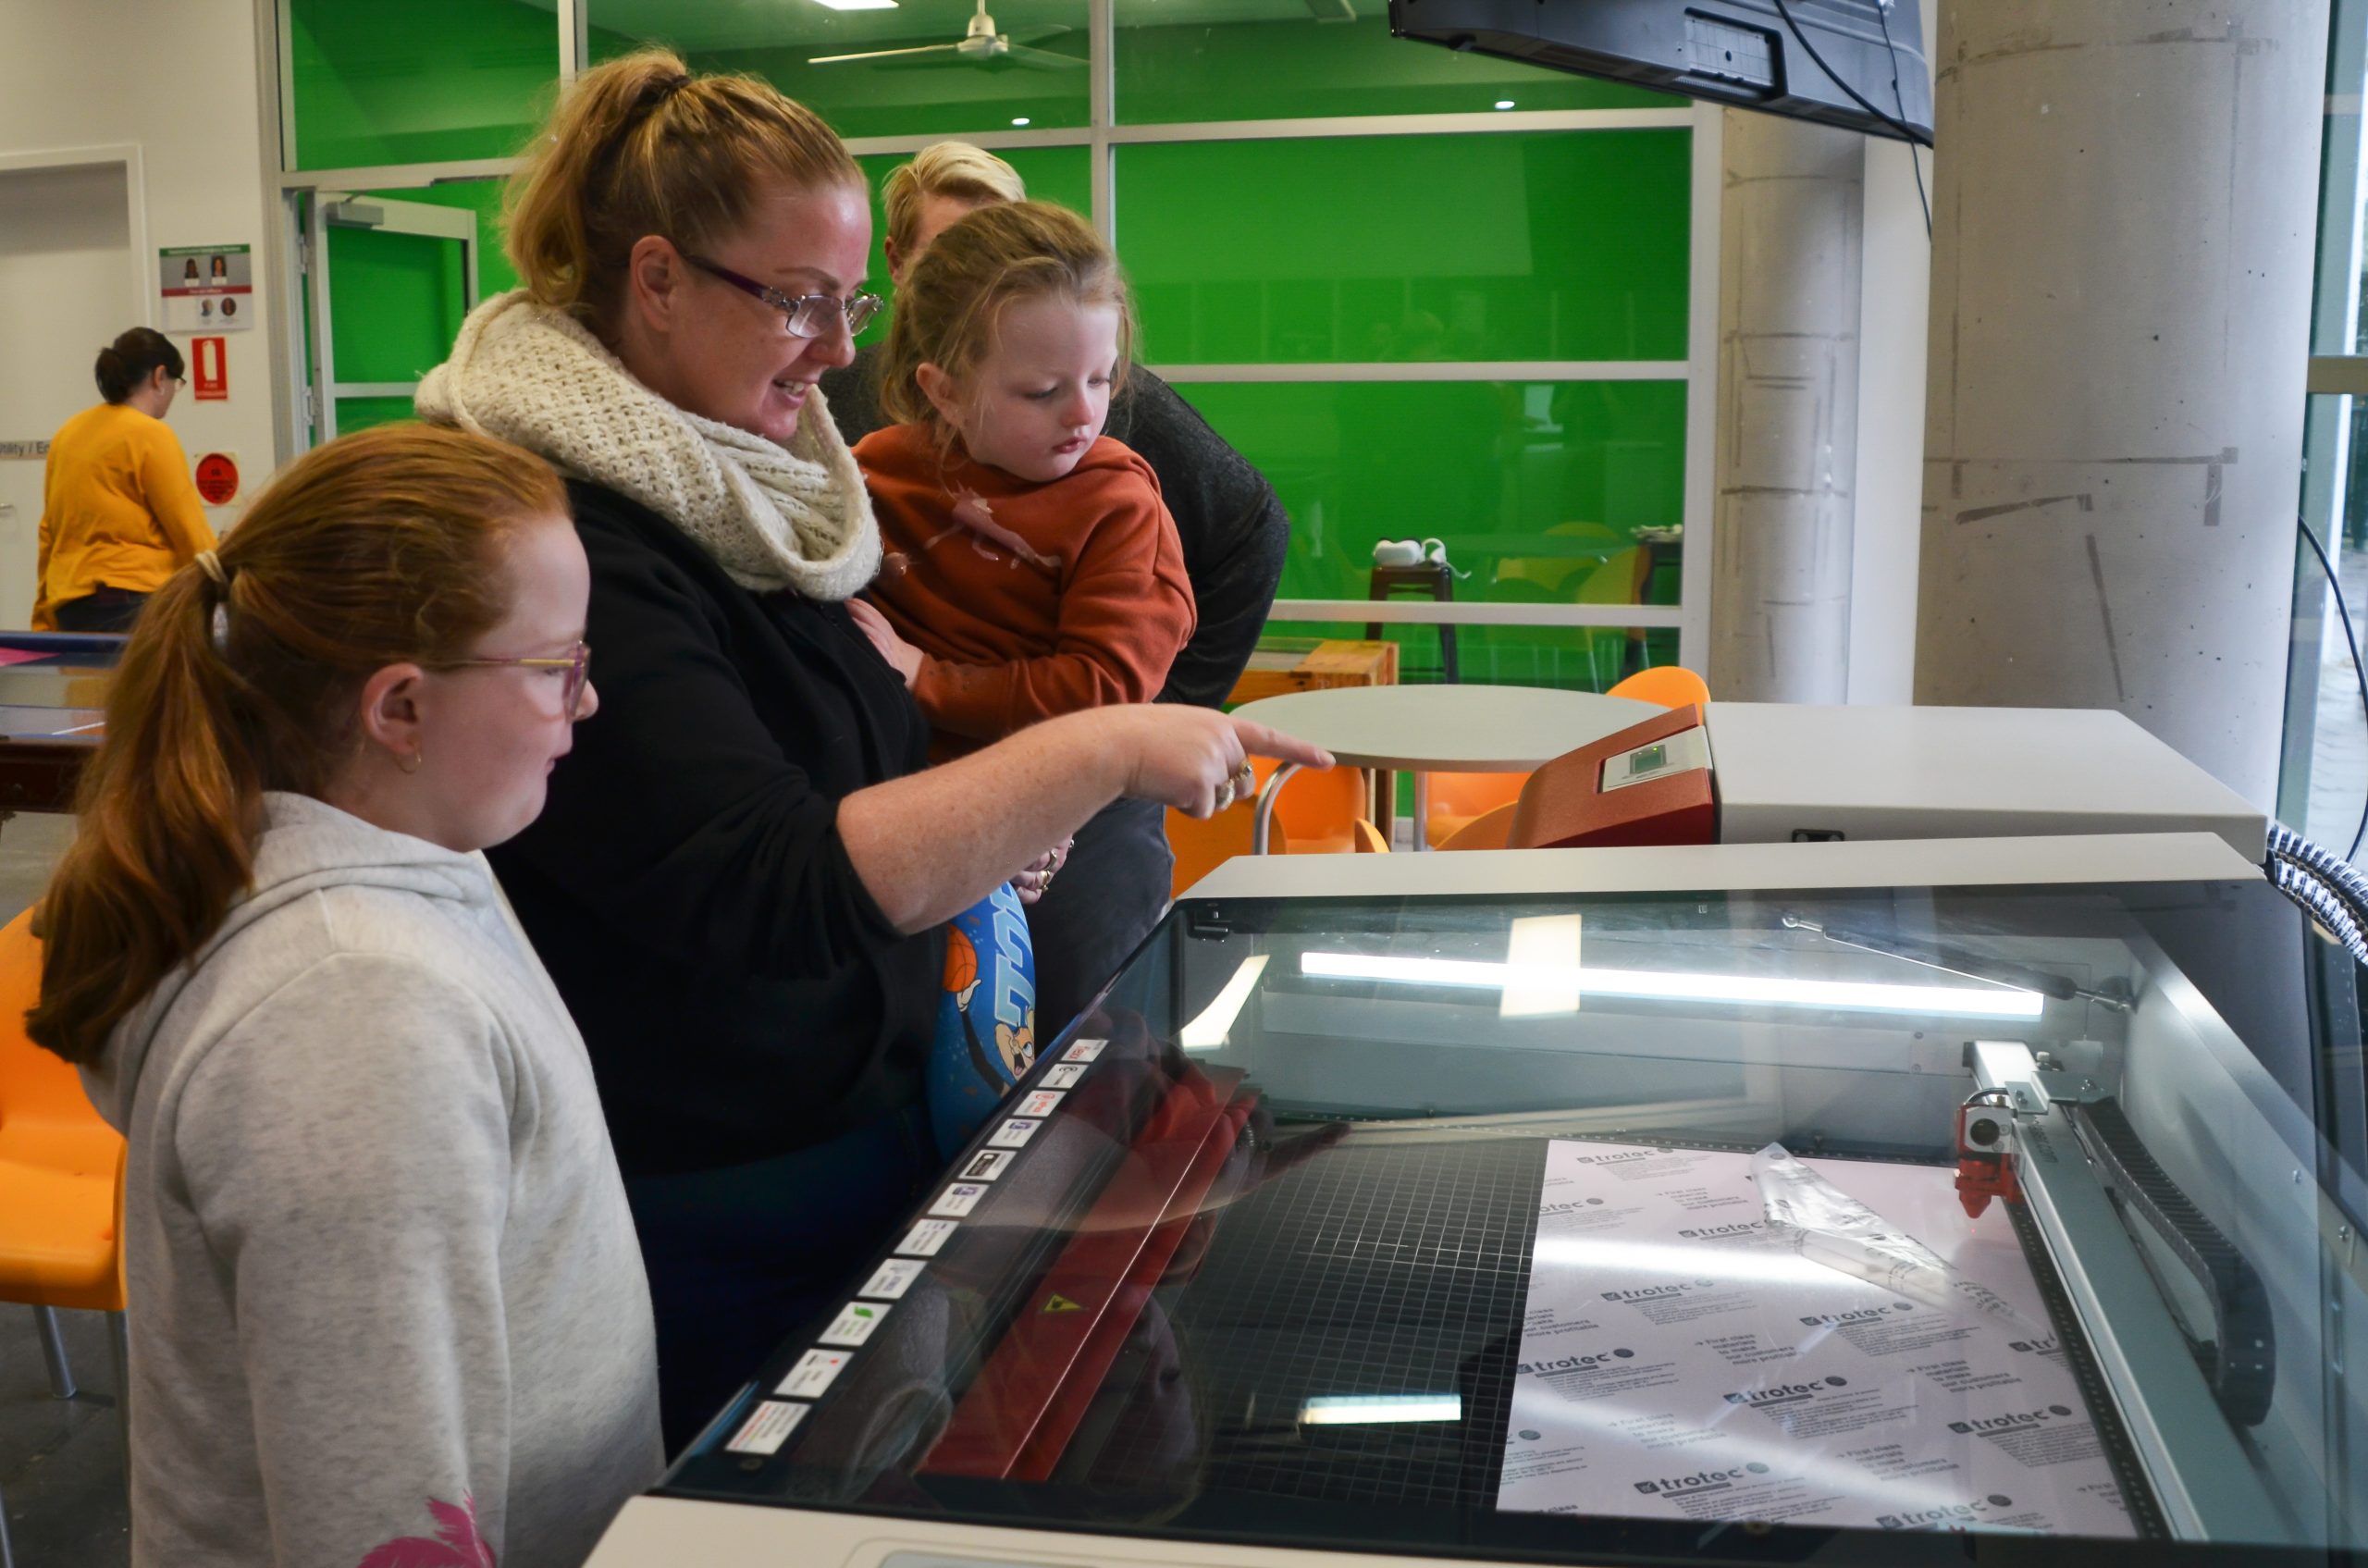 People looking at a laser cutter